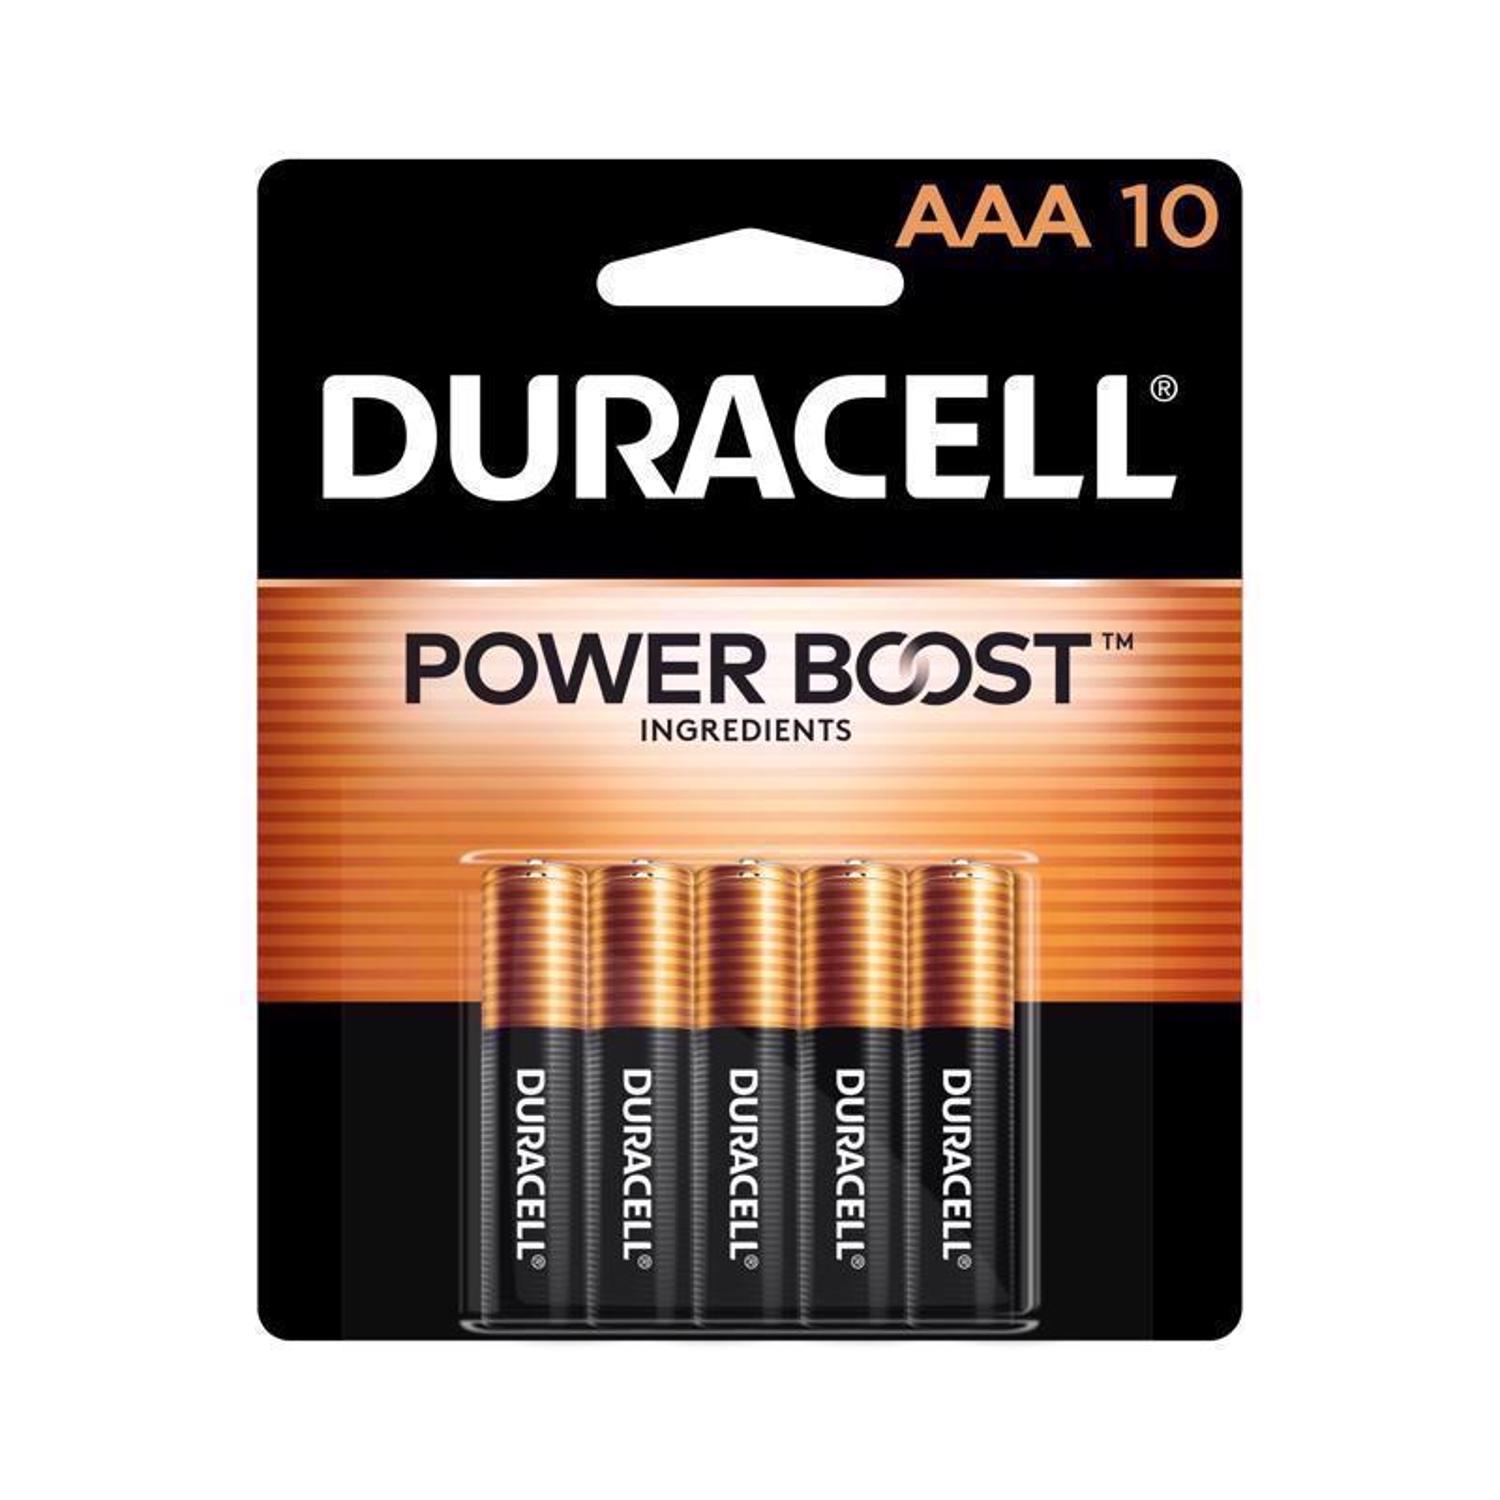 Photos - Household Switch Duracell Coppertop AAA Alkaline Batteries 10 pk Carded MN2400B10Z 